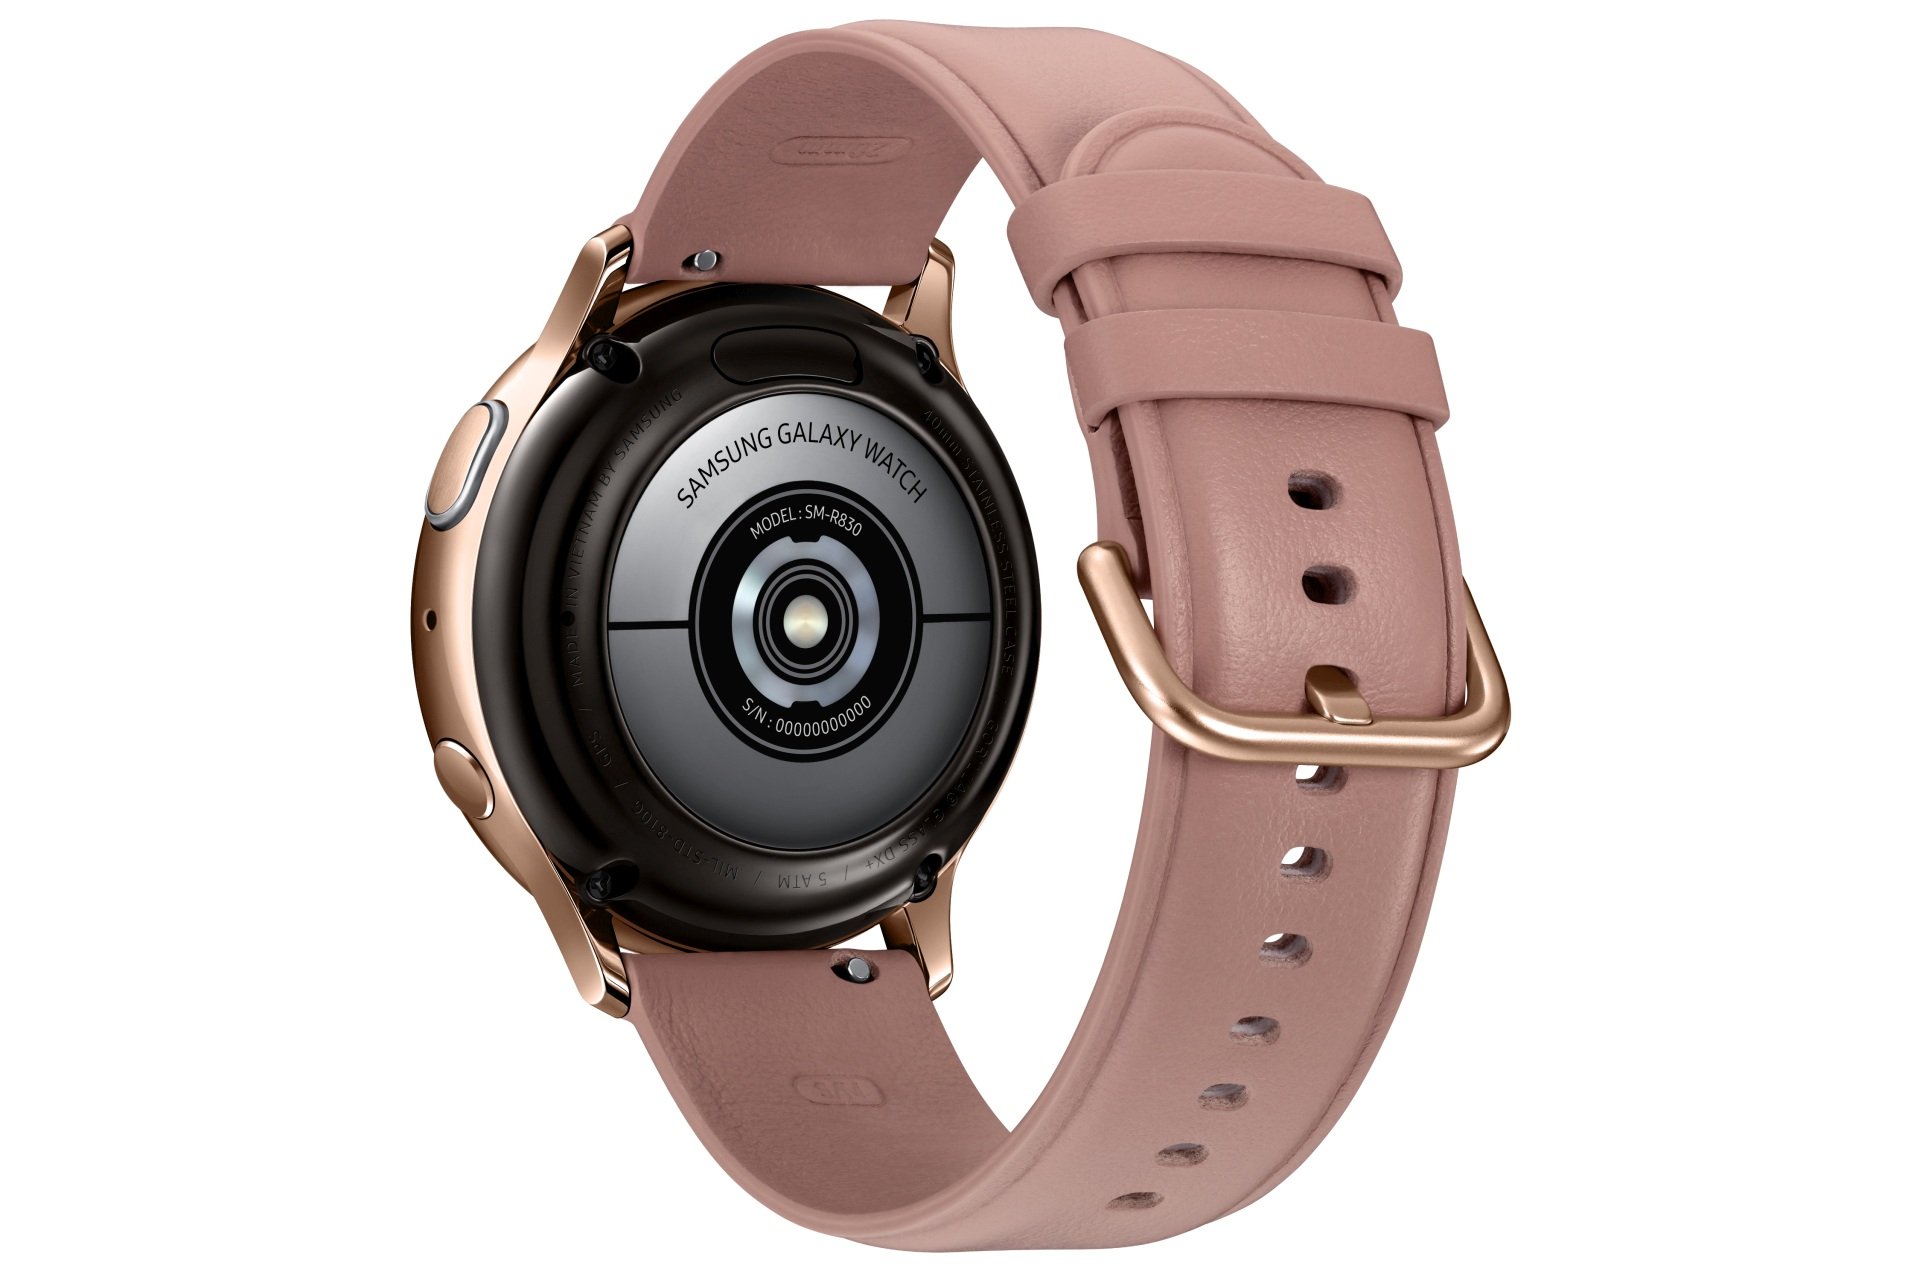 Galaxy Watch Active 2 goes official with touch bezel, new features and LTE - SamMobile